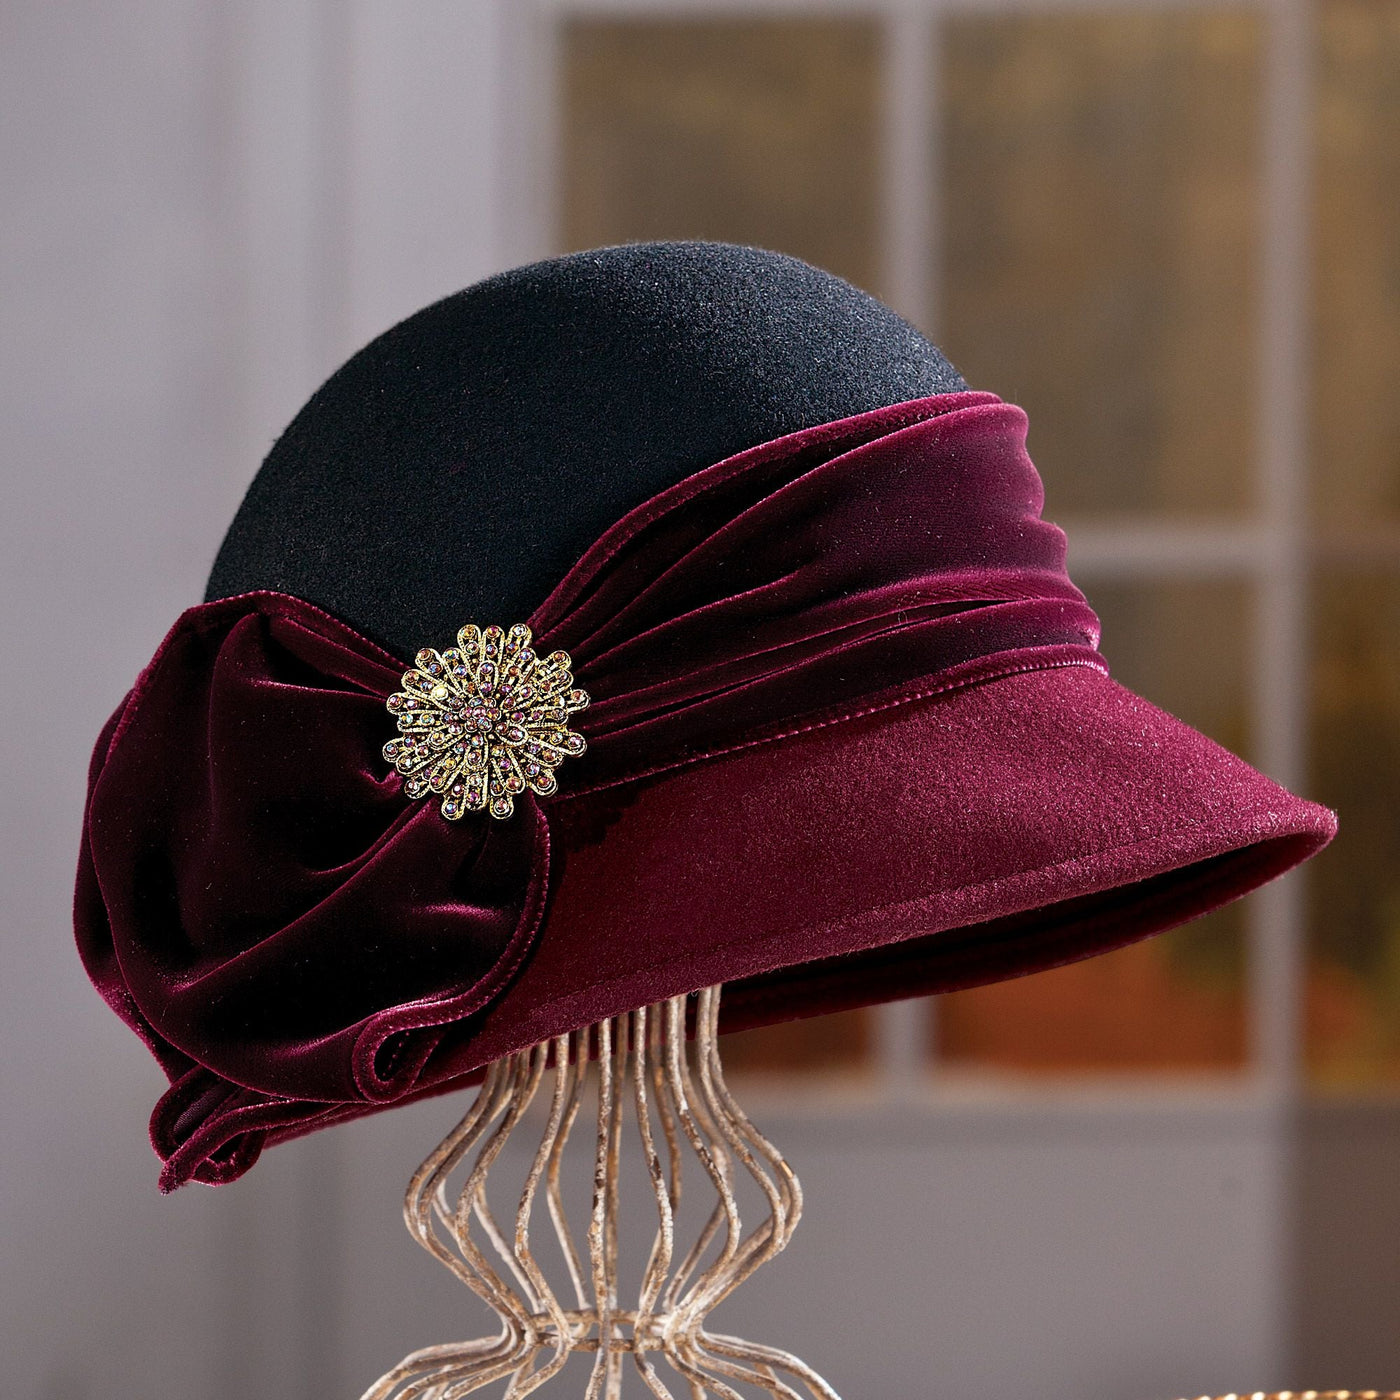 Valerie Two-Toned Wool Cloche